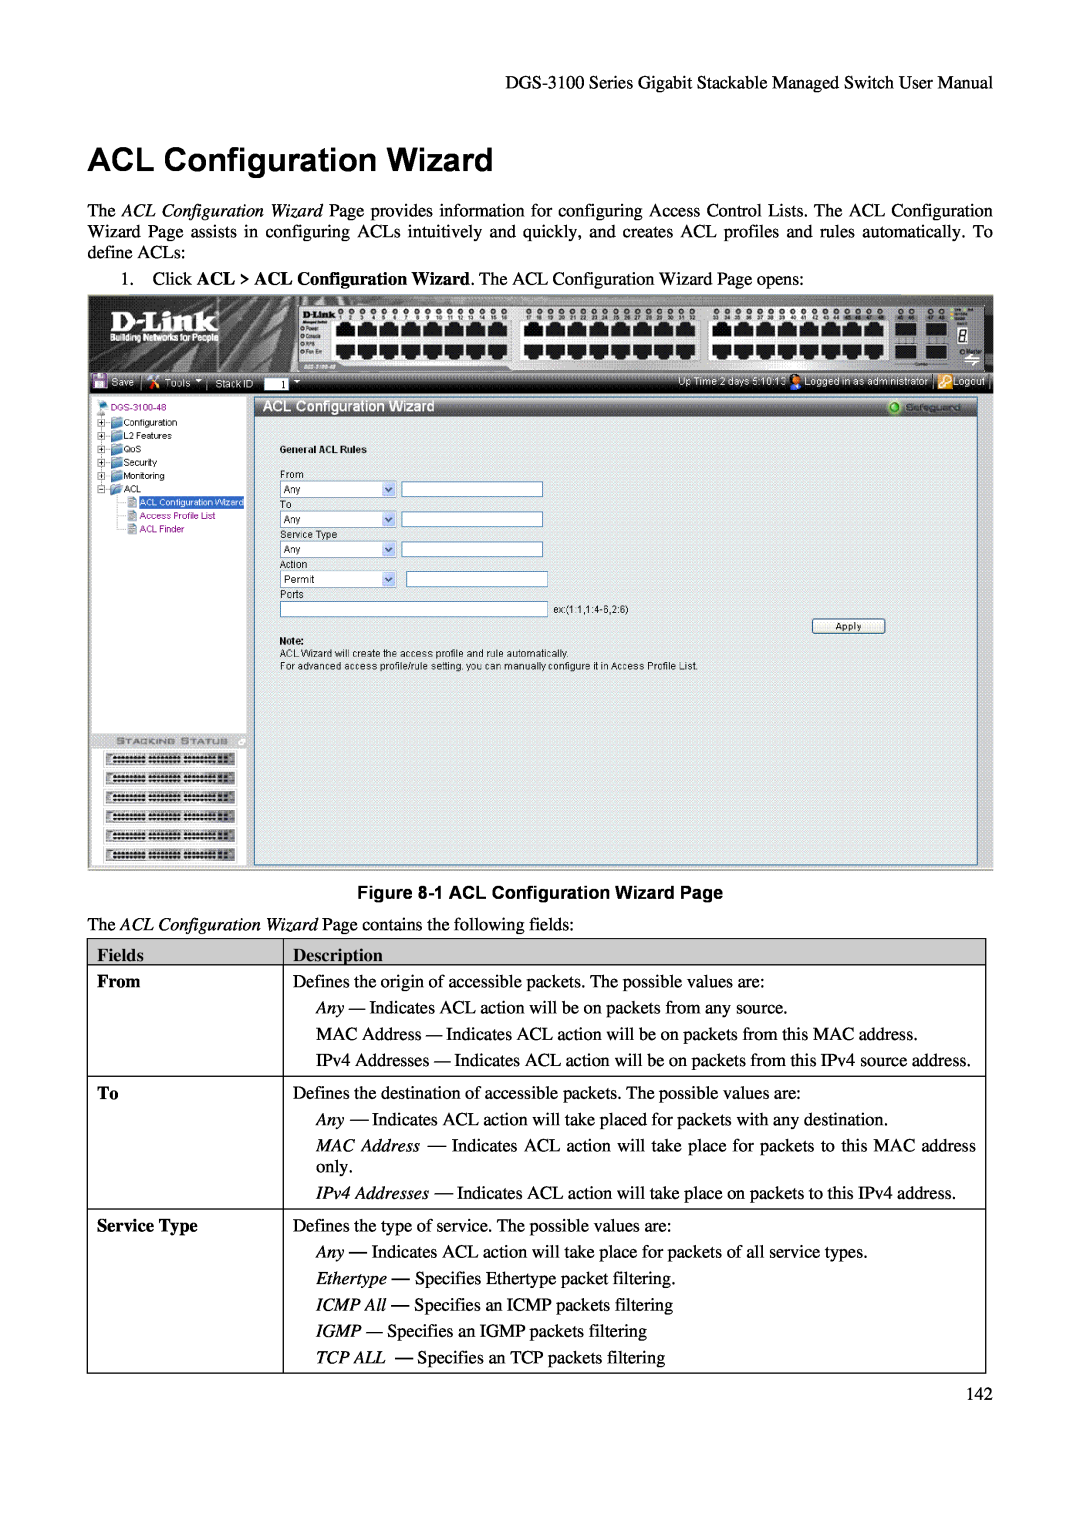 D-Link DGS-3100 user manual 1 ACL Configuration Wizard Page, Fields, Description, From, Service Type 